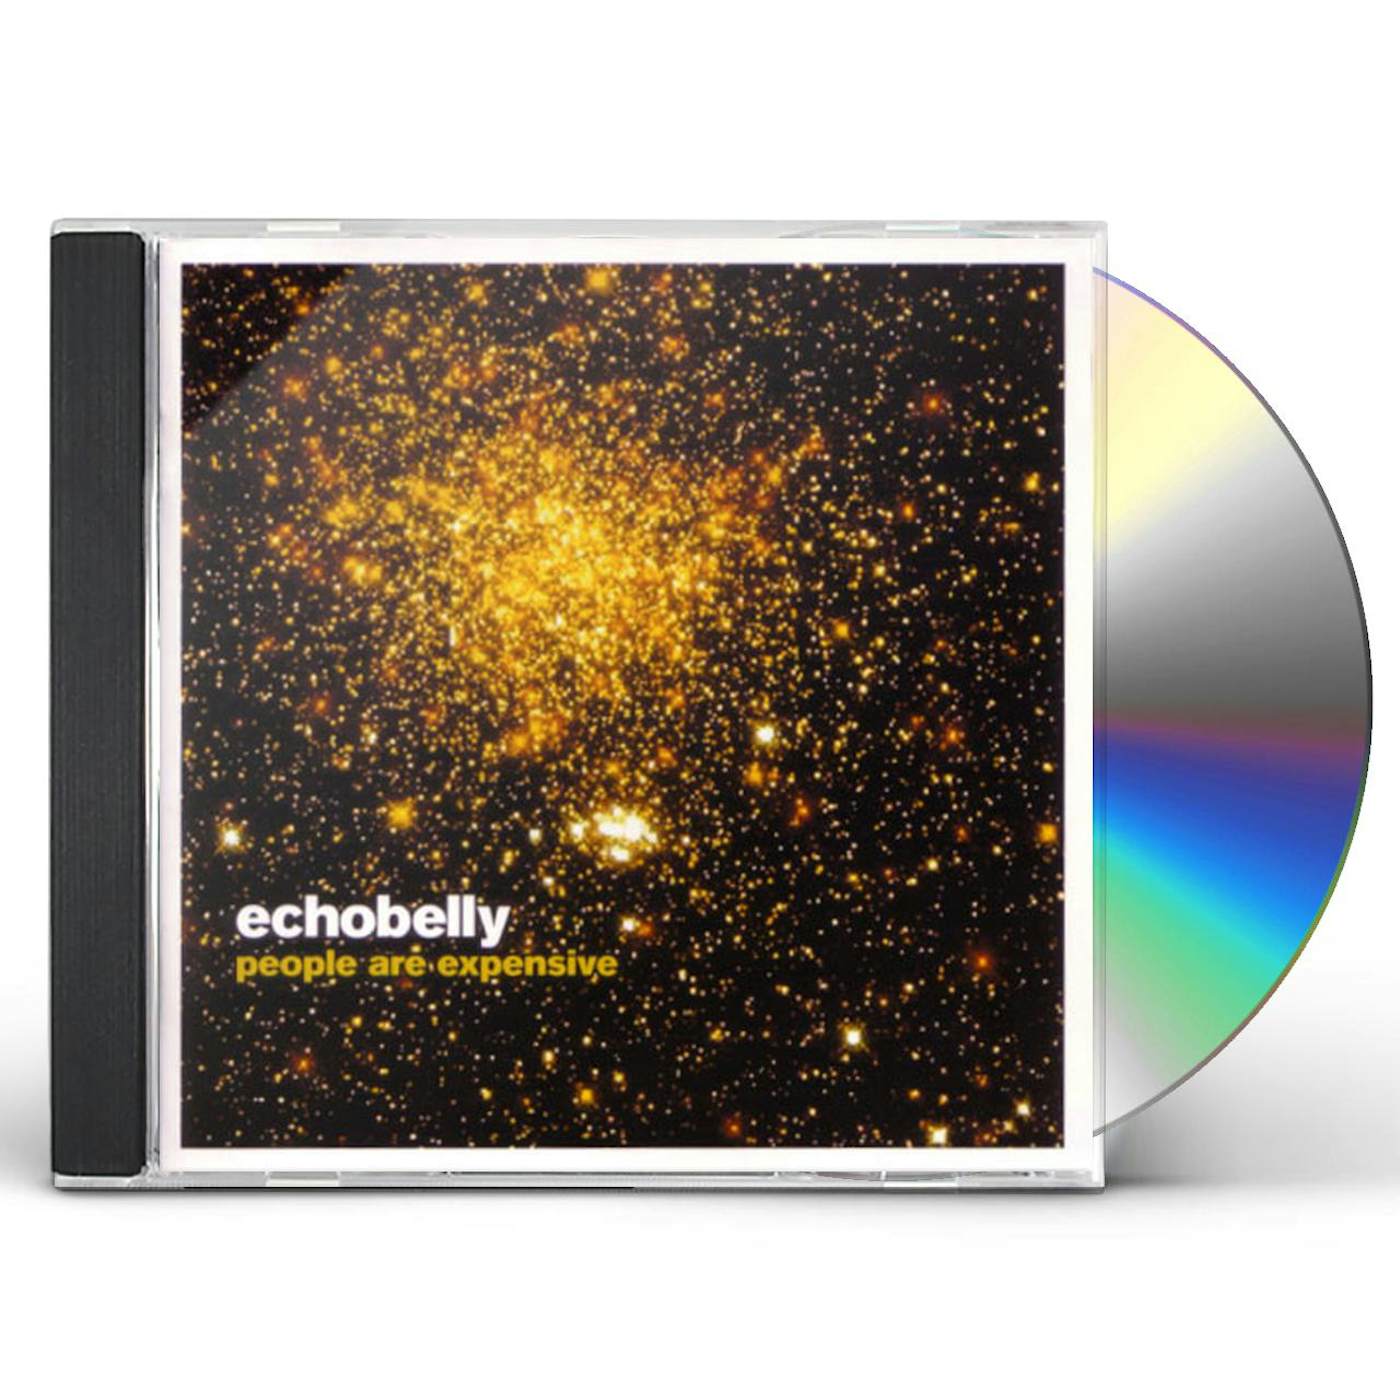 Echobelly PEOPLE ARE EXPENSIVE CD